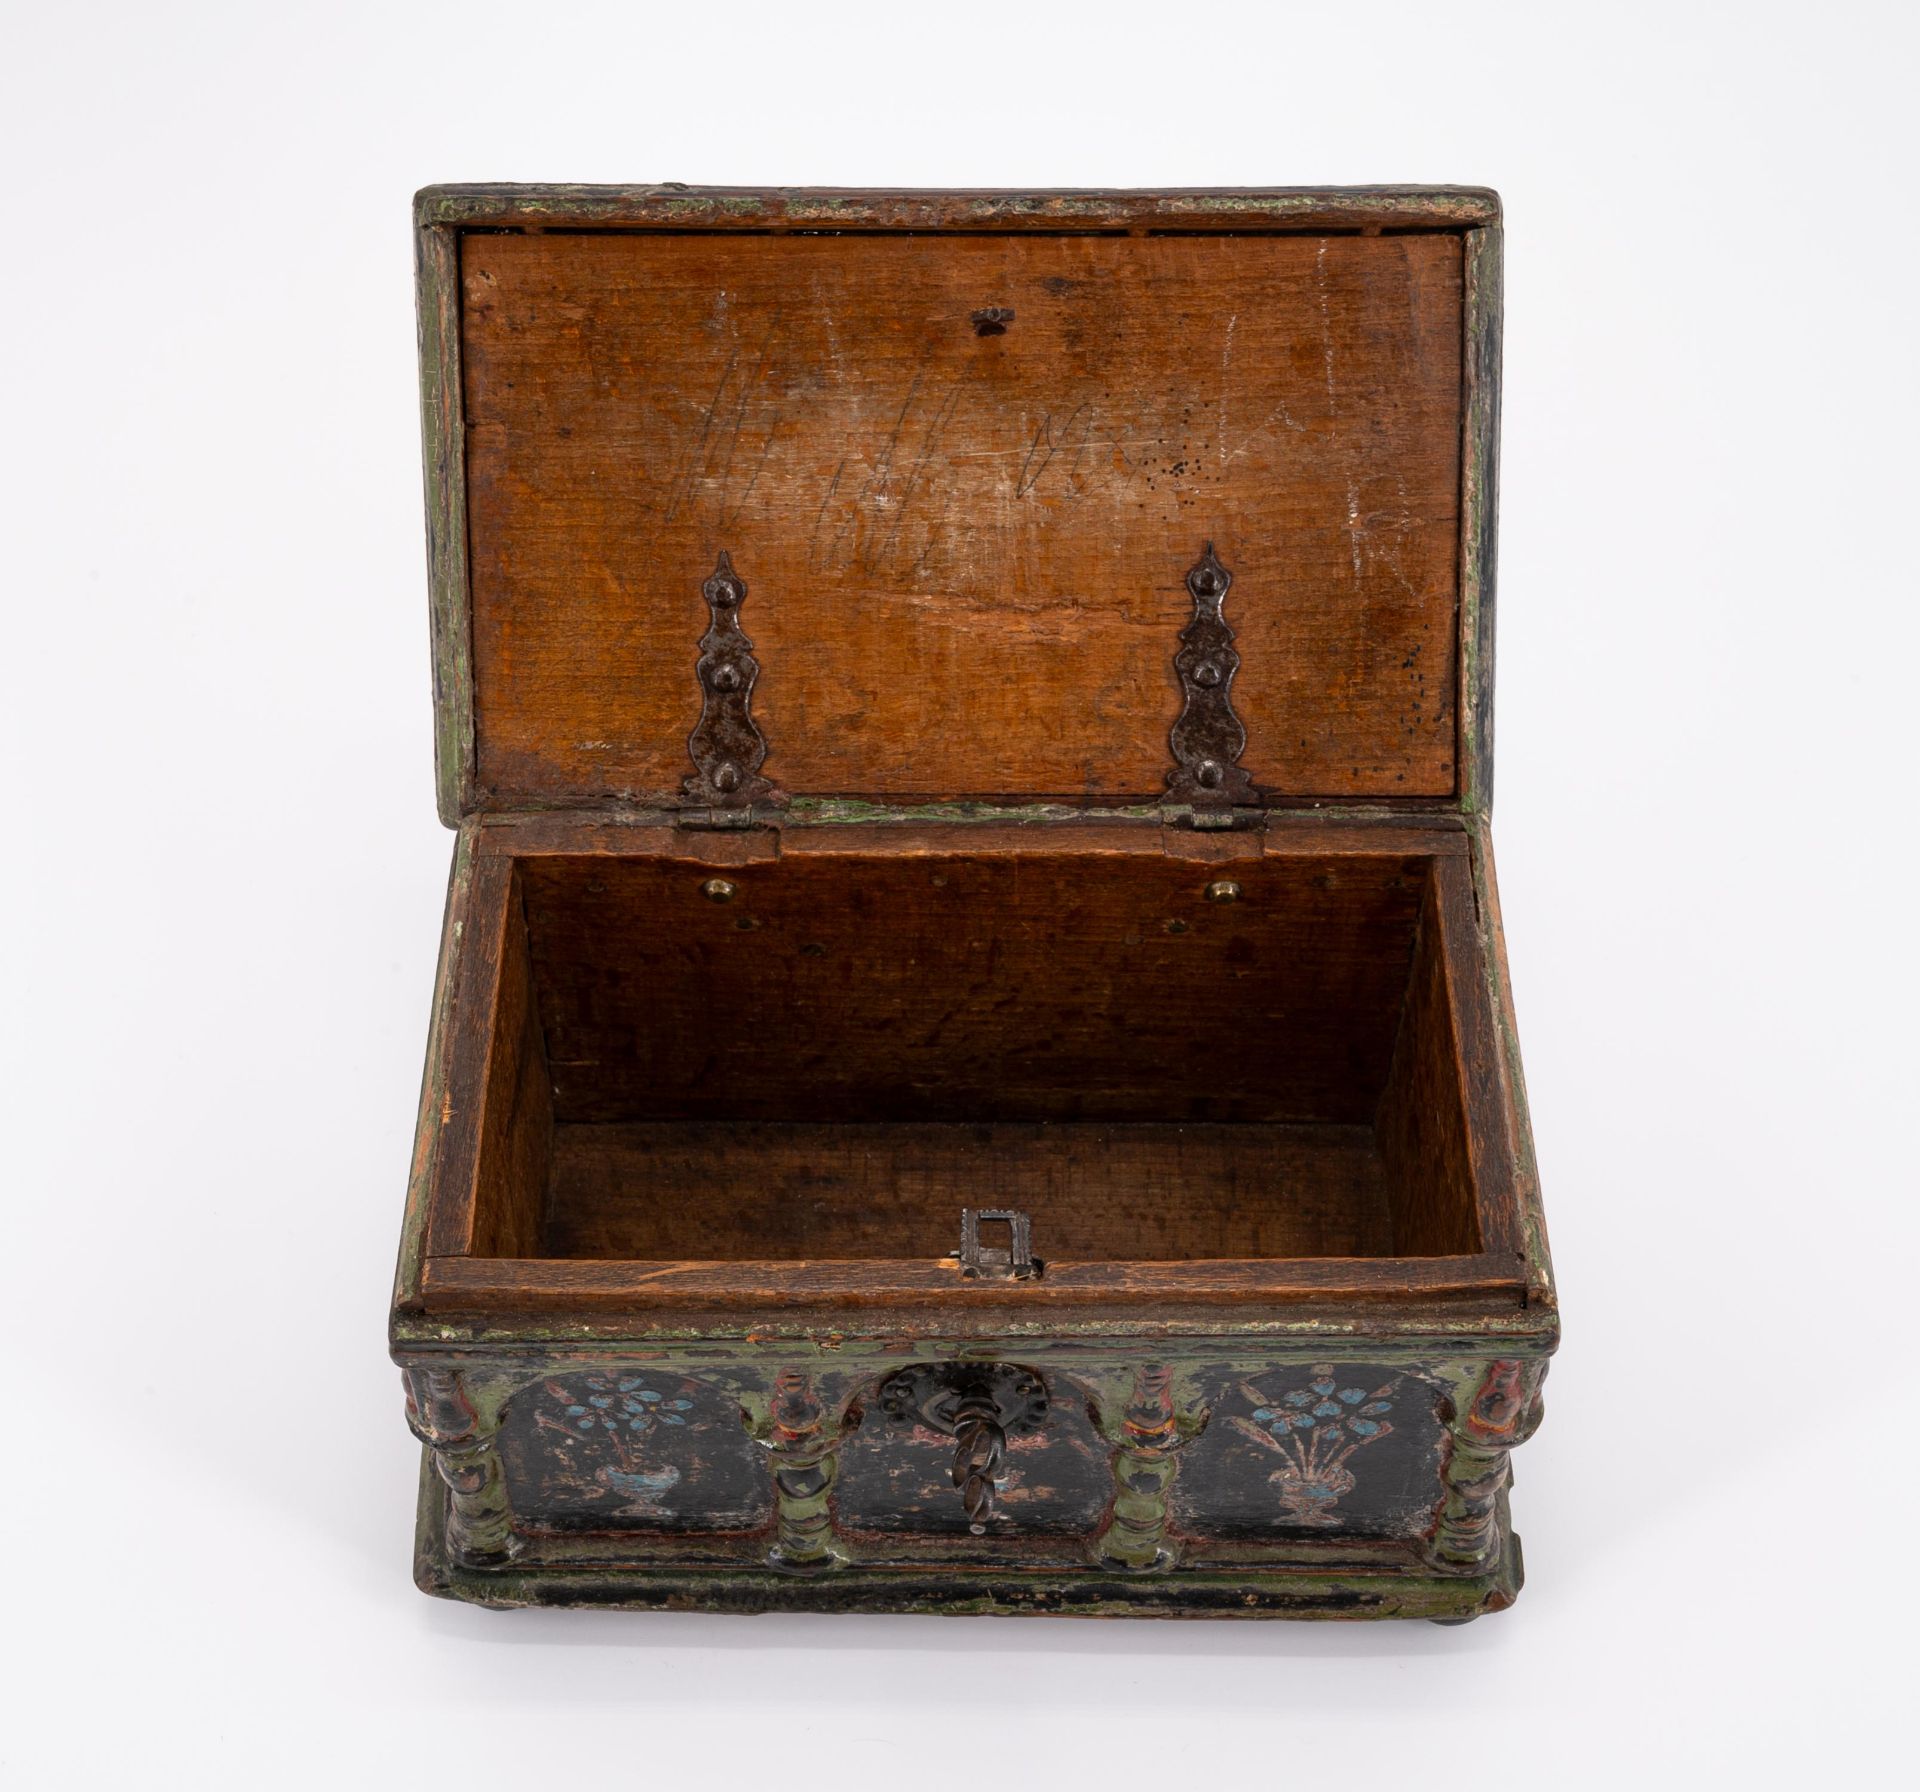 MINIATURE BEECH WOOD CHEST - Image 6 of 7